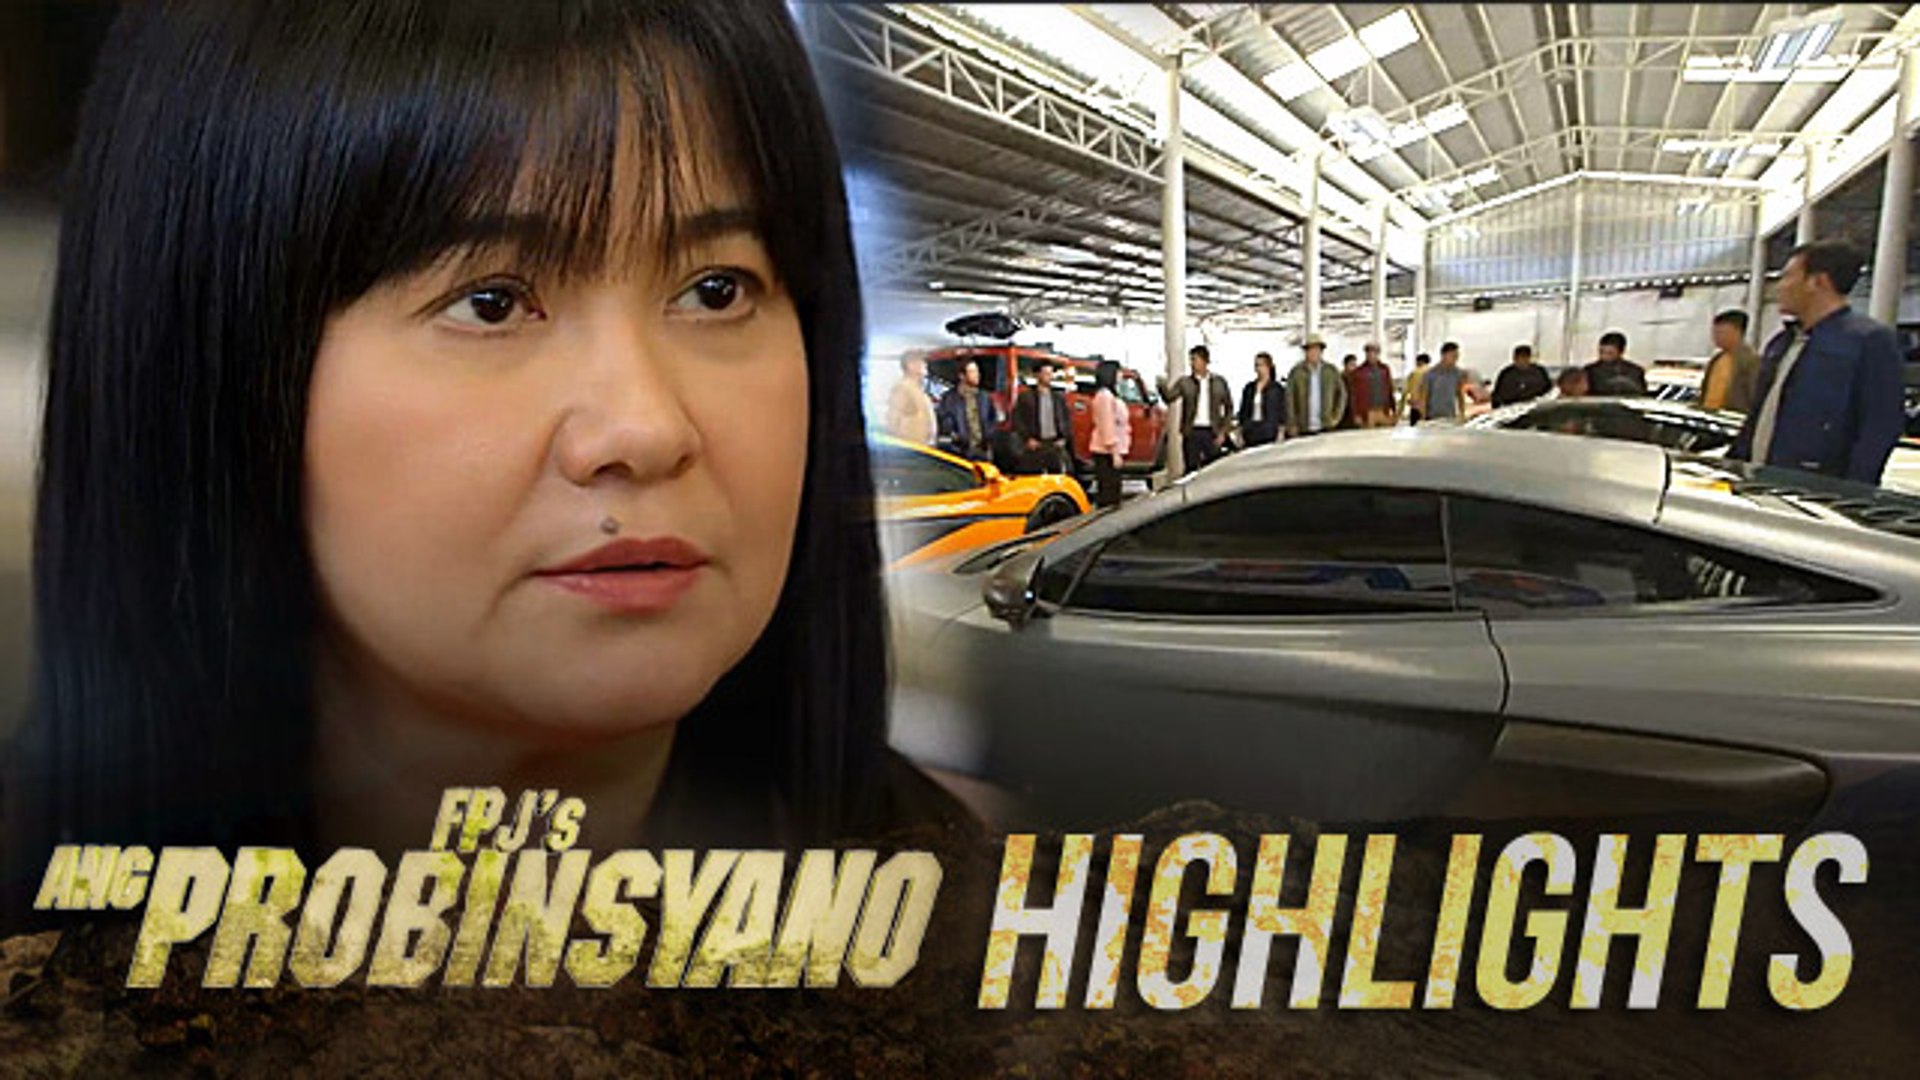 Lily lends a helping hand to Vendetta to gain their trust | FPJ's Ang Probinsyano